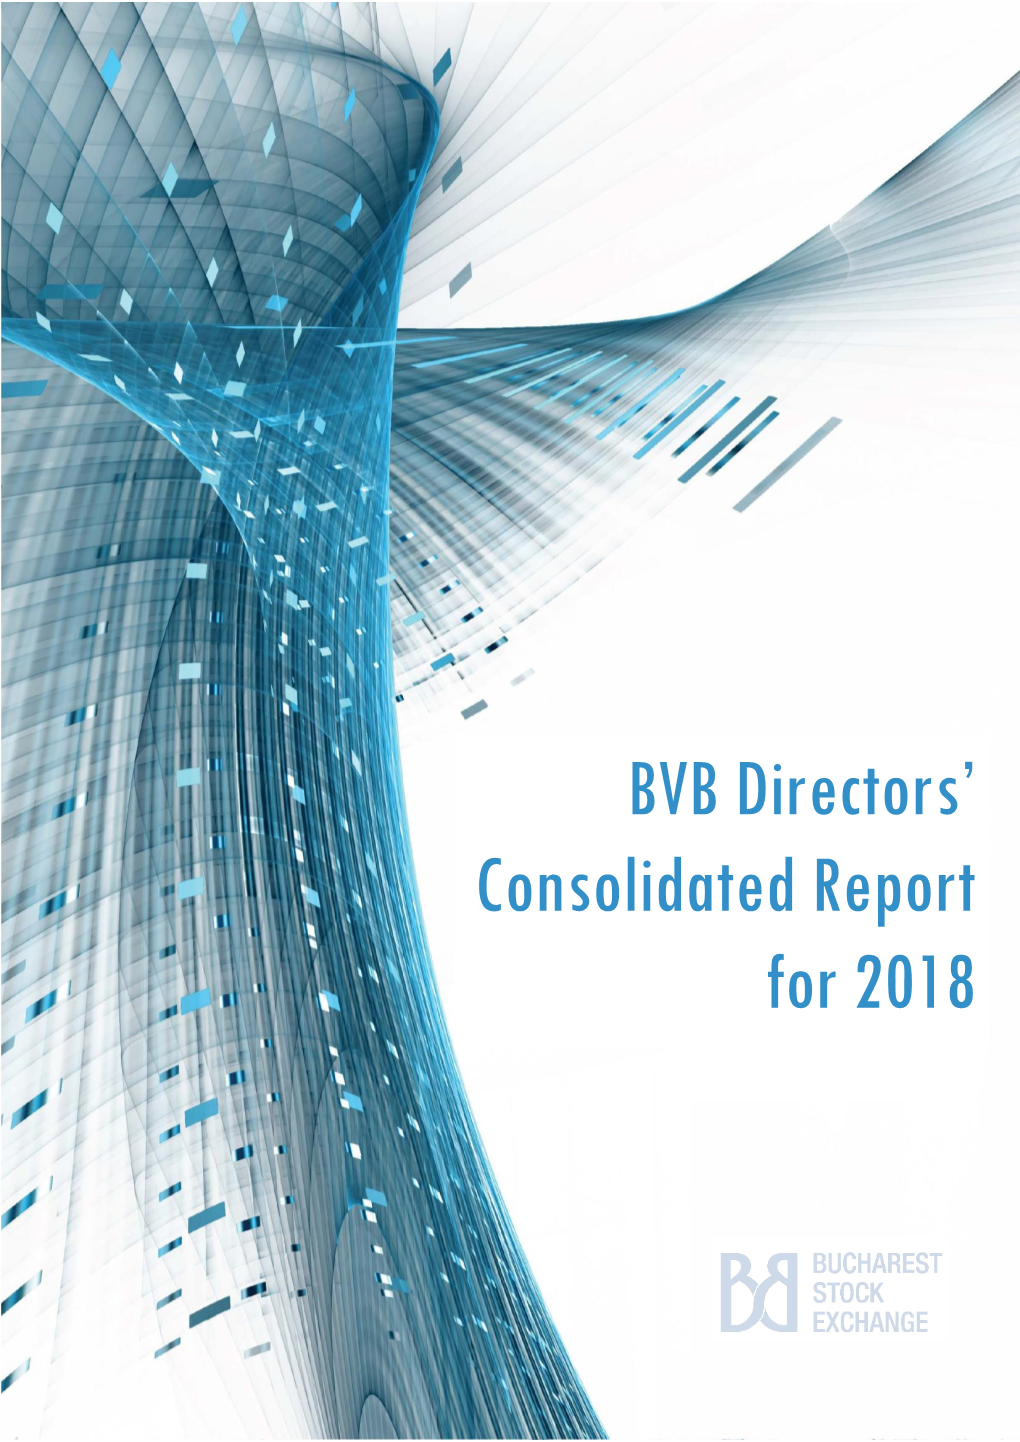 BVB Directors' Consolidated Report for 2018